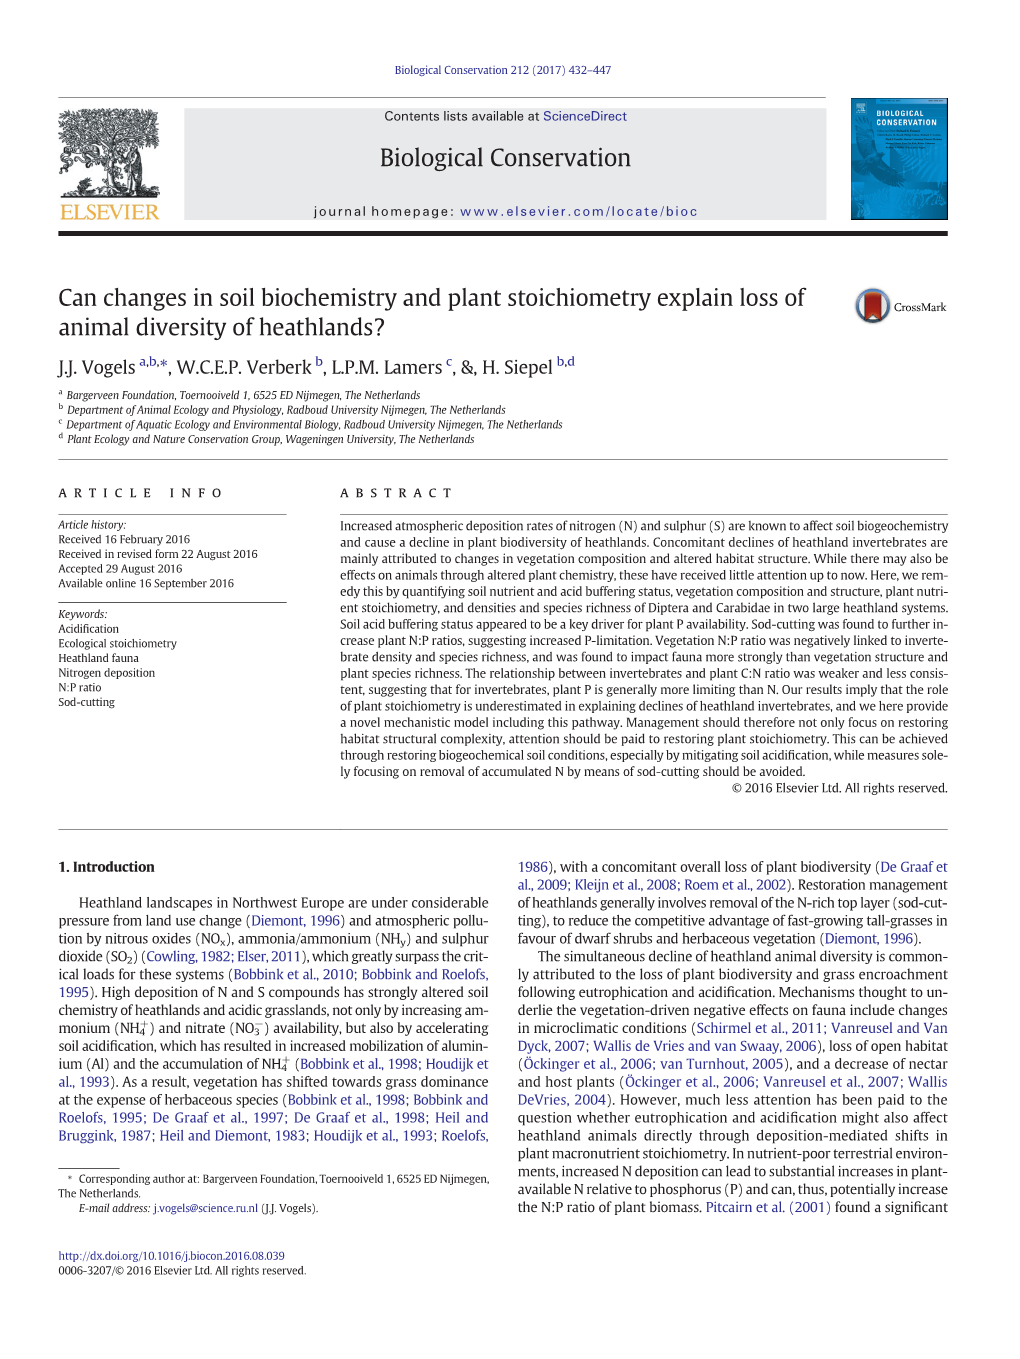 Can Changes in Soil Biochemistry and Plant Stoichiometry Explain Loss of Animal Diversity of Heathlands?